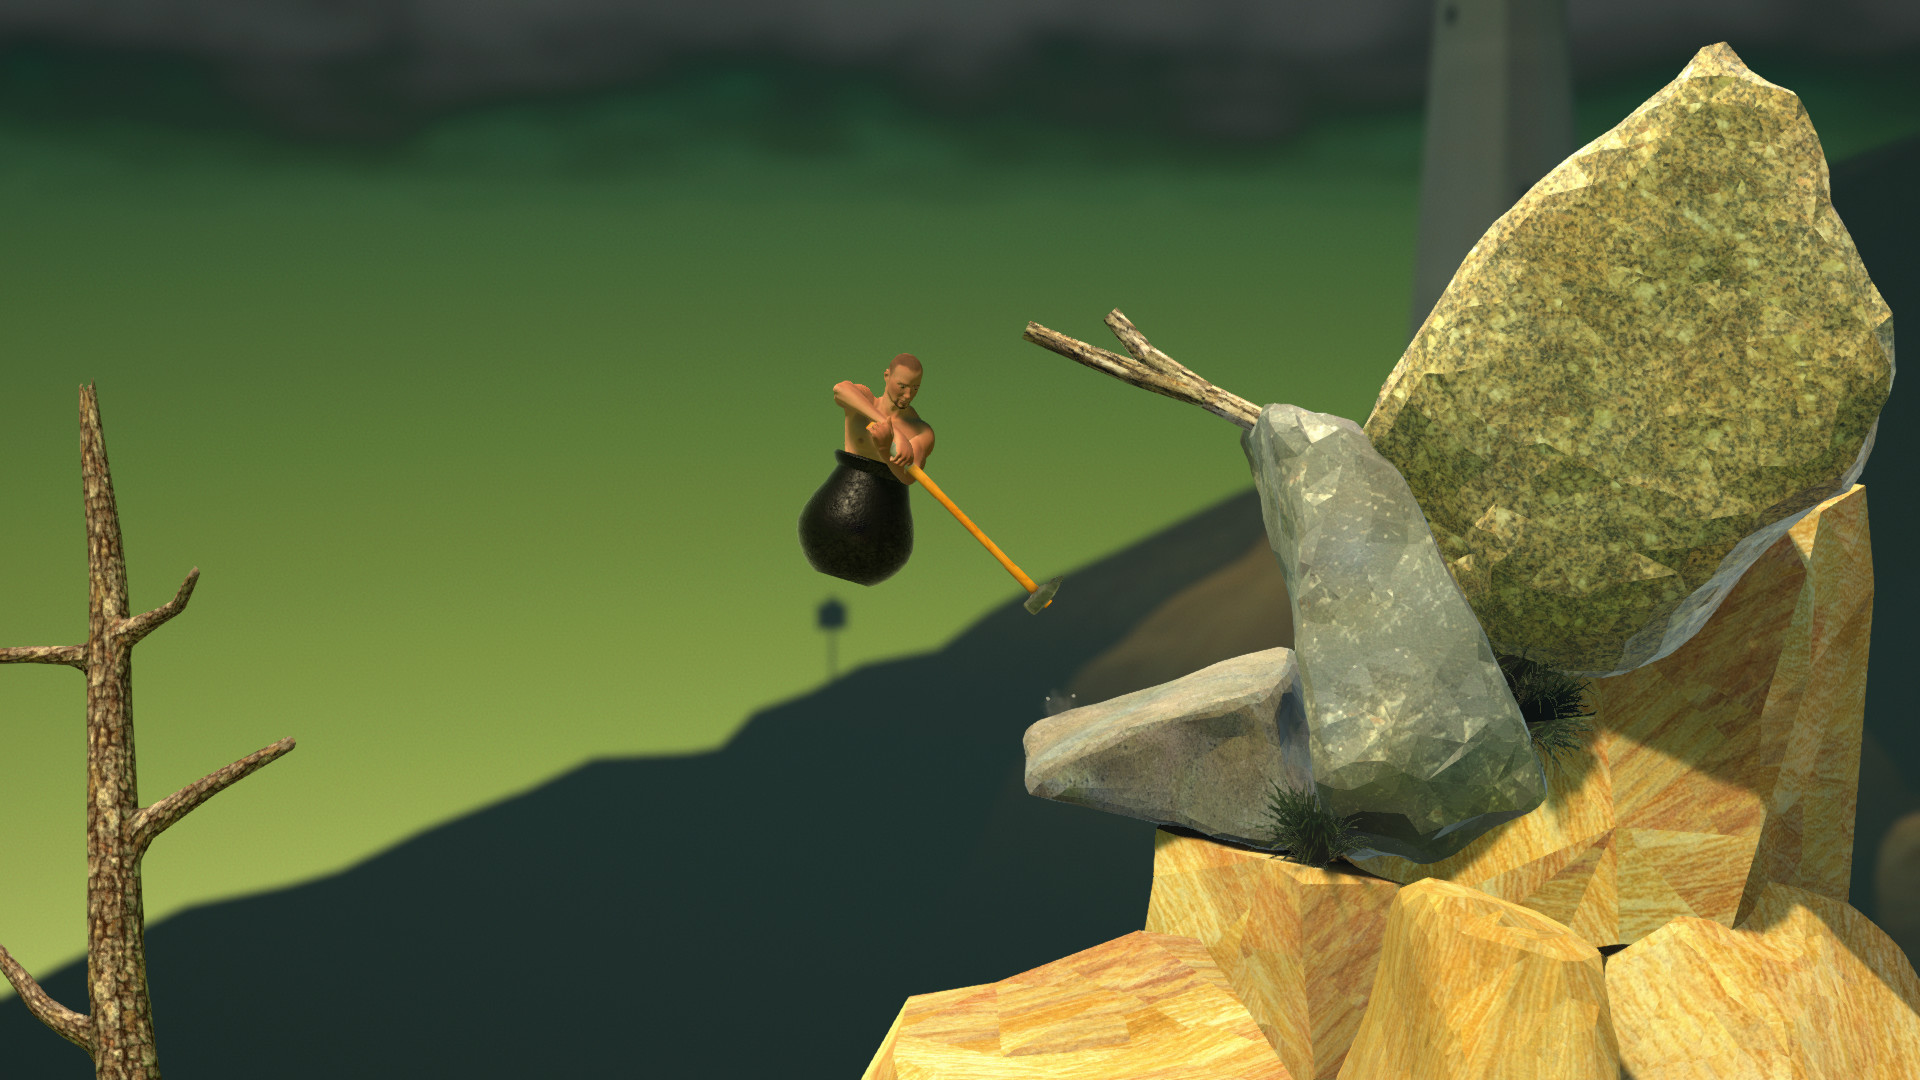 Getting Over It with Bennett Foddy | Banmaynuocnong